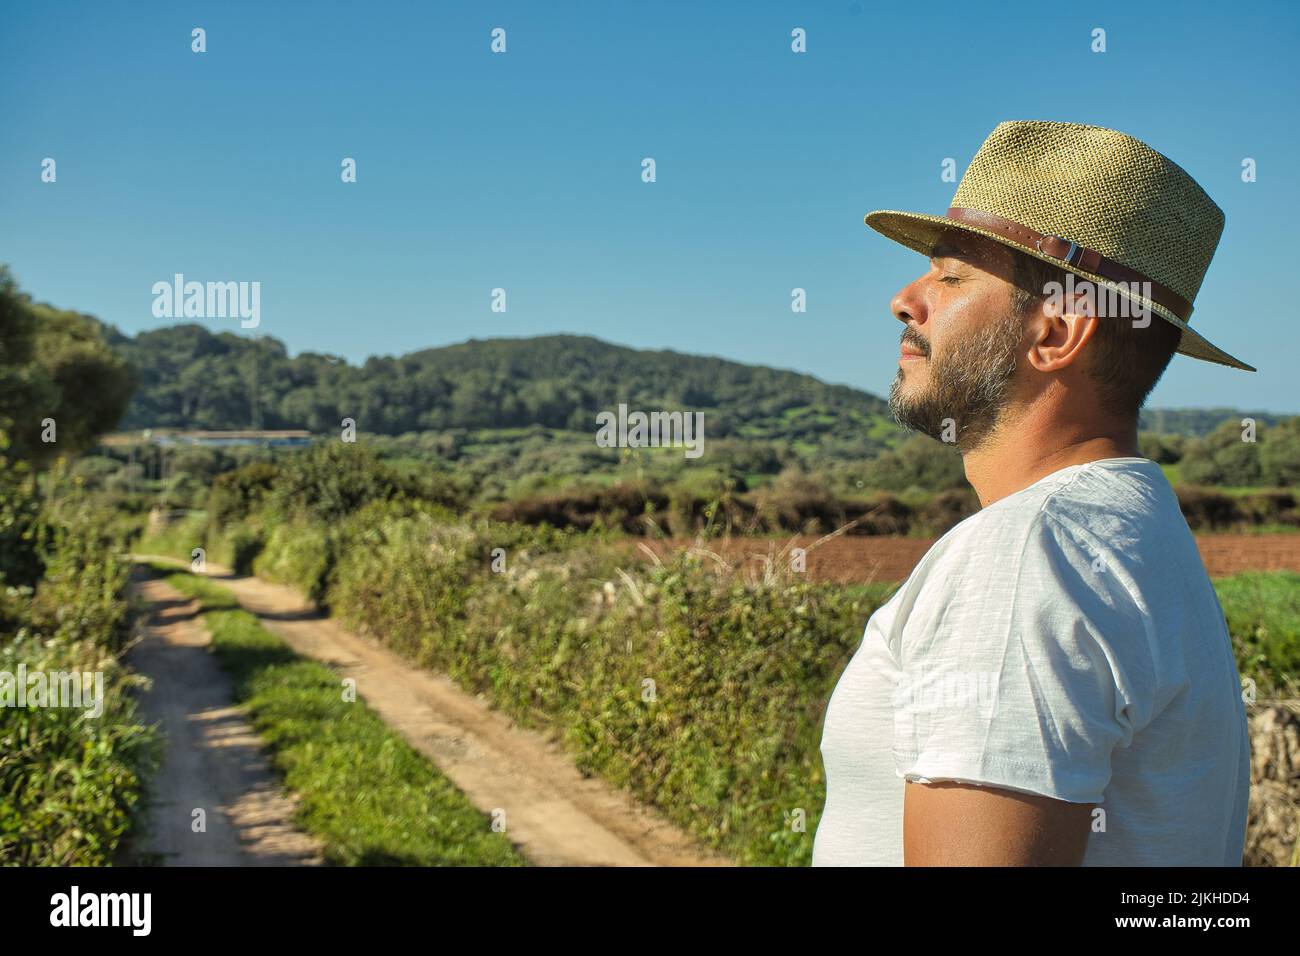 Handsome man in a hat, white t-shirt and jeans relaxes in nature feeling the sun on the skin of his face. Wellness, summertime and vacation concept. Stock Photo